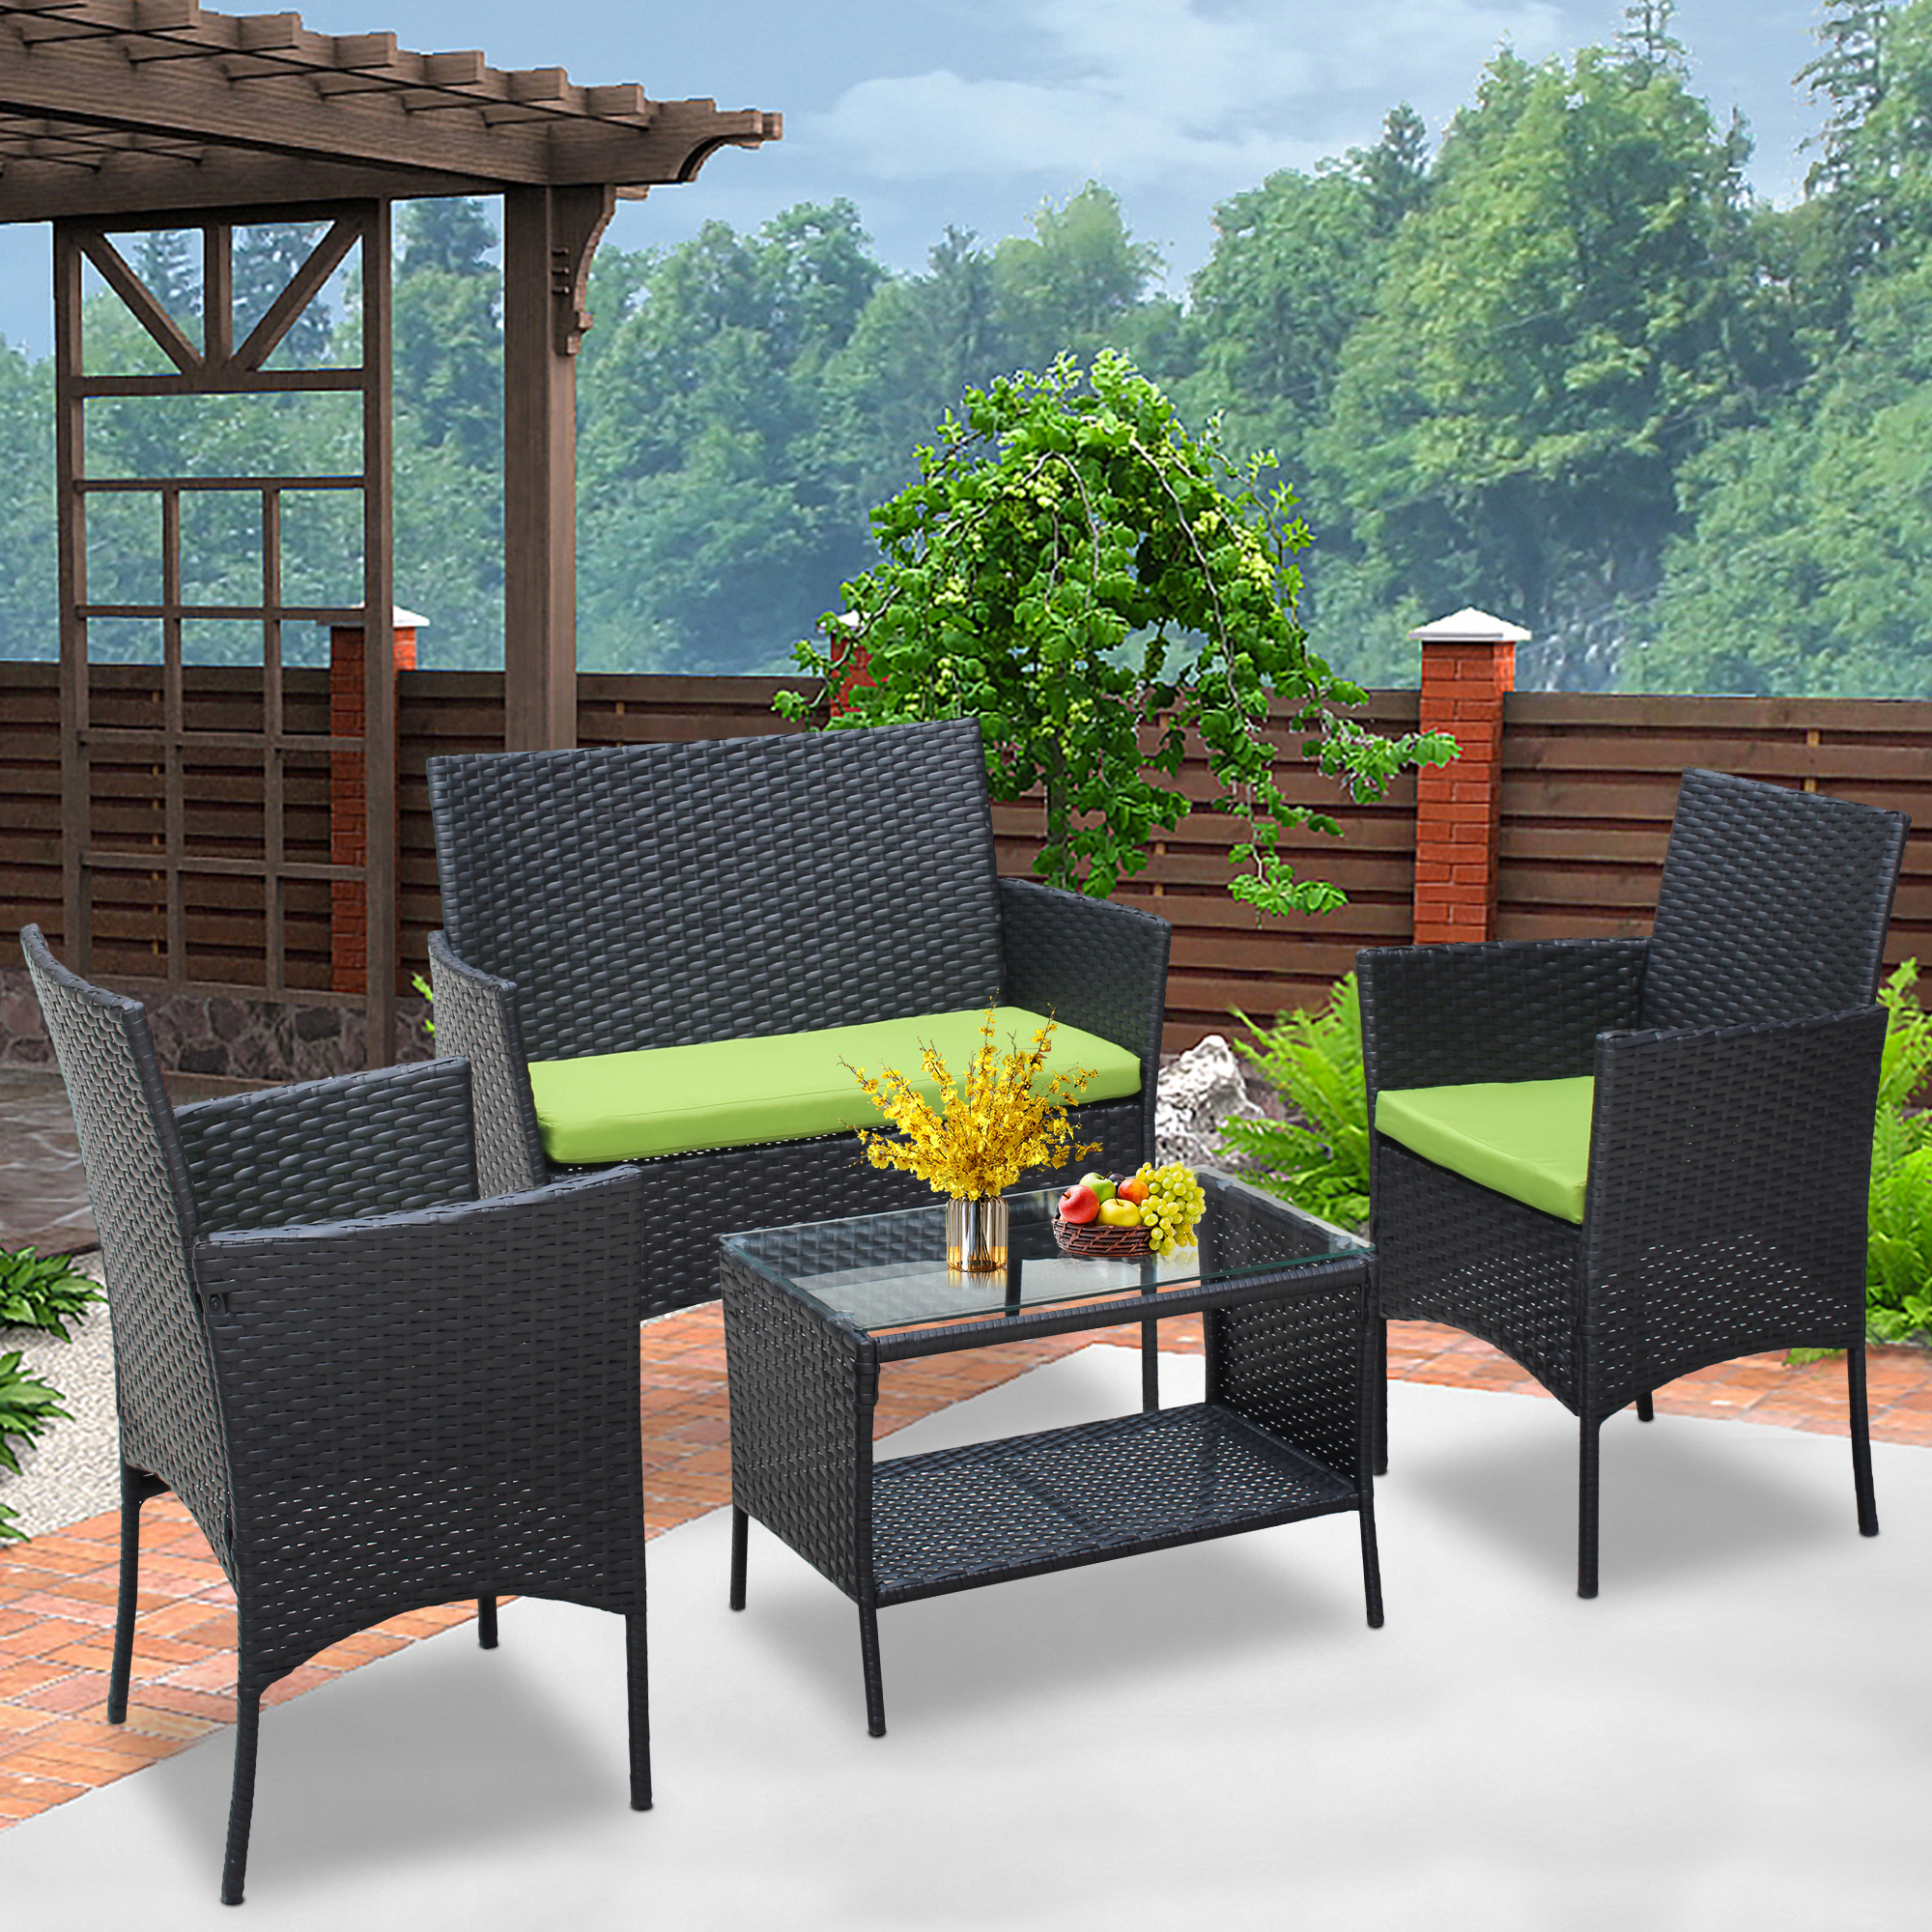 4-Piece Patio Outdoor Rattan Chair, Bistro Table Conversation Set, with Soft Cushion & Glass Table, Patio Rattan Conversation Furniture Set, Leisure Furniture Set for Garden Backyard Balcony, T194 - image 1 of 8